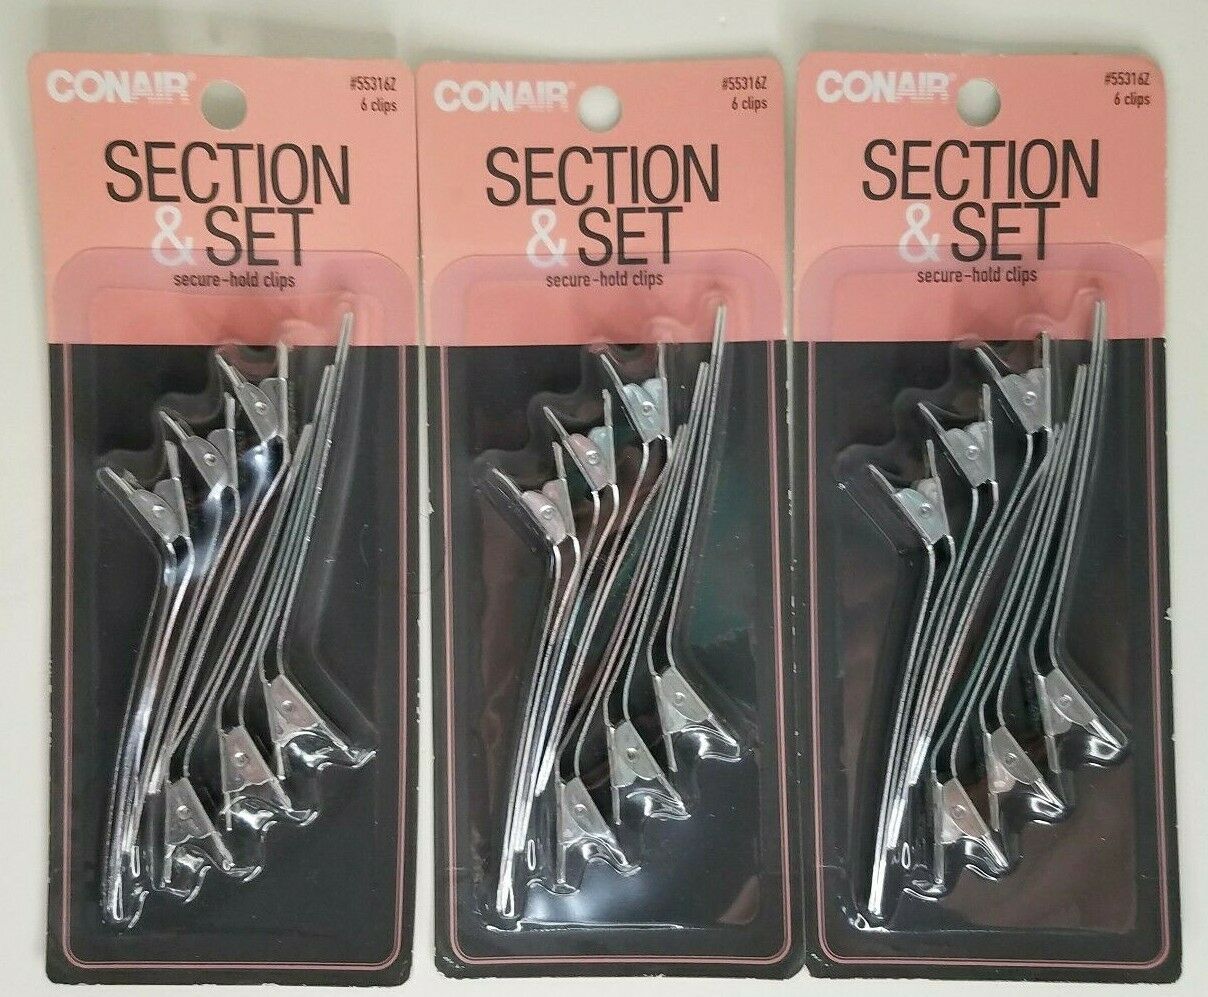 Primary image for Conair Section & Set Clips #55316Z 6pc Lot of 3 *18 Clips*